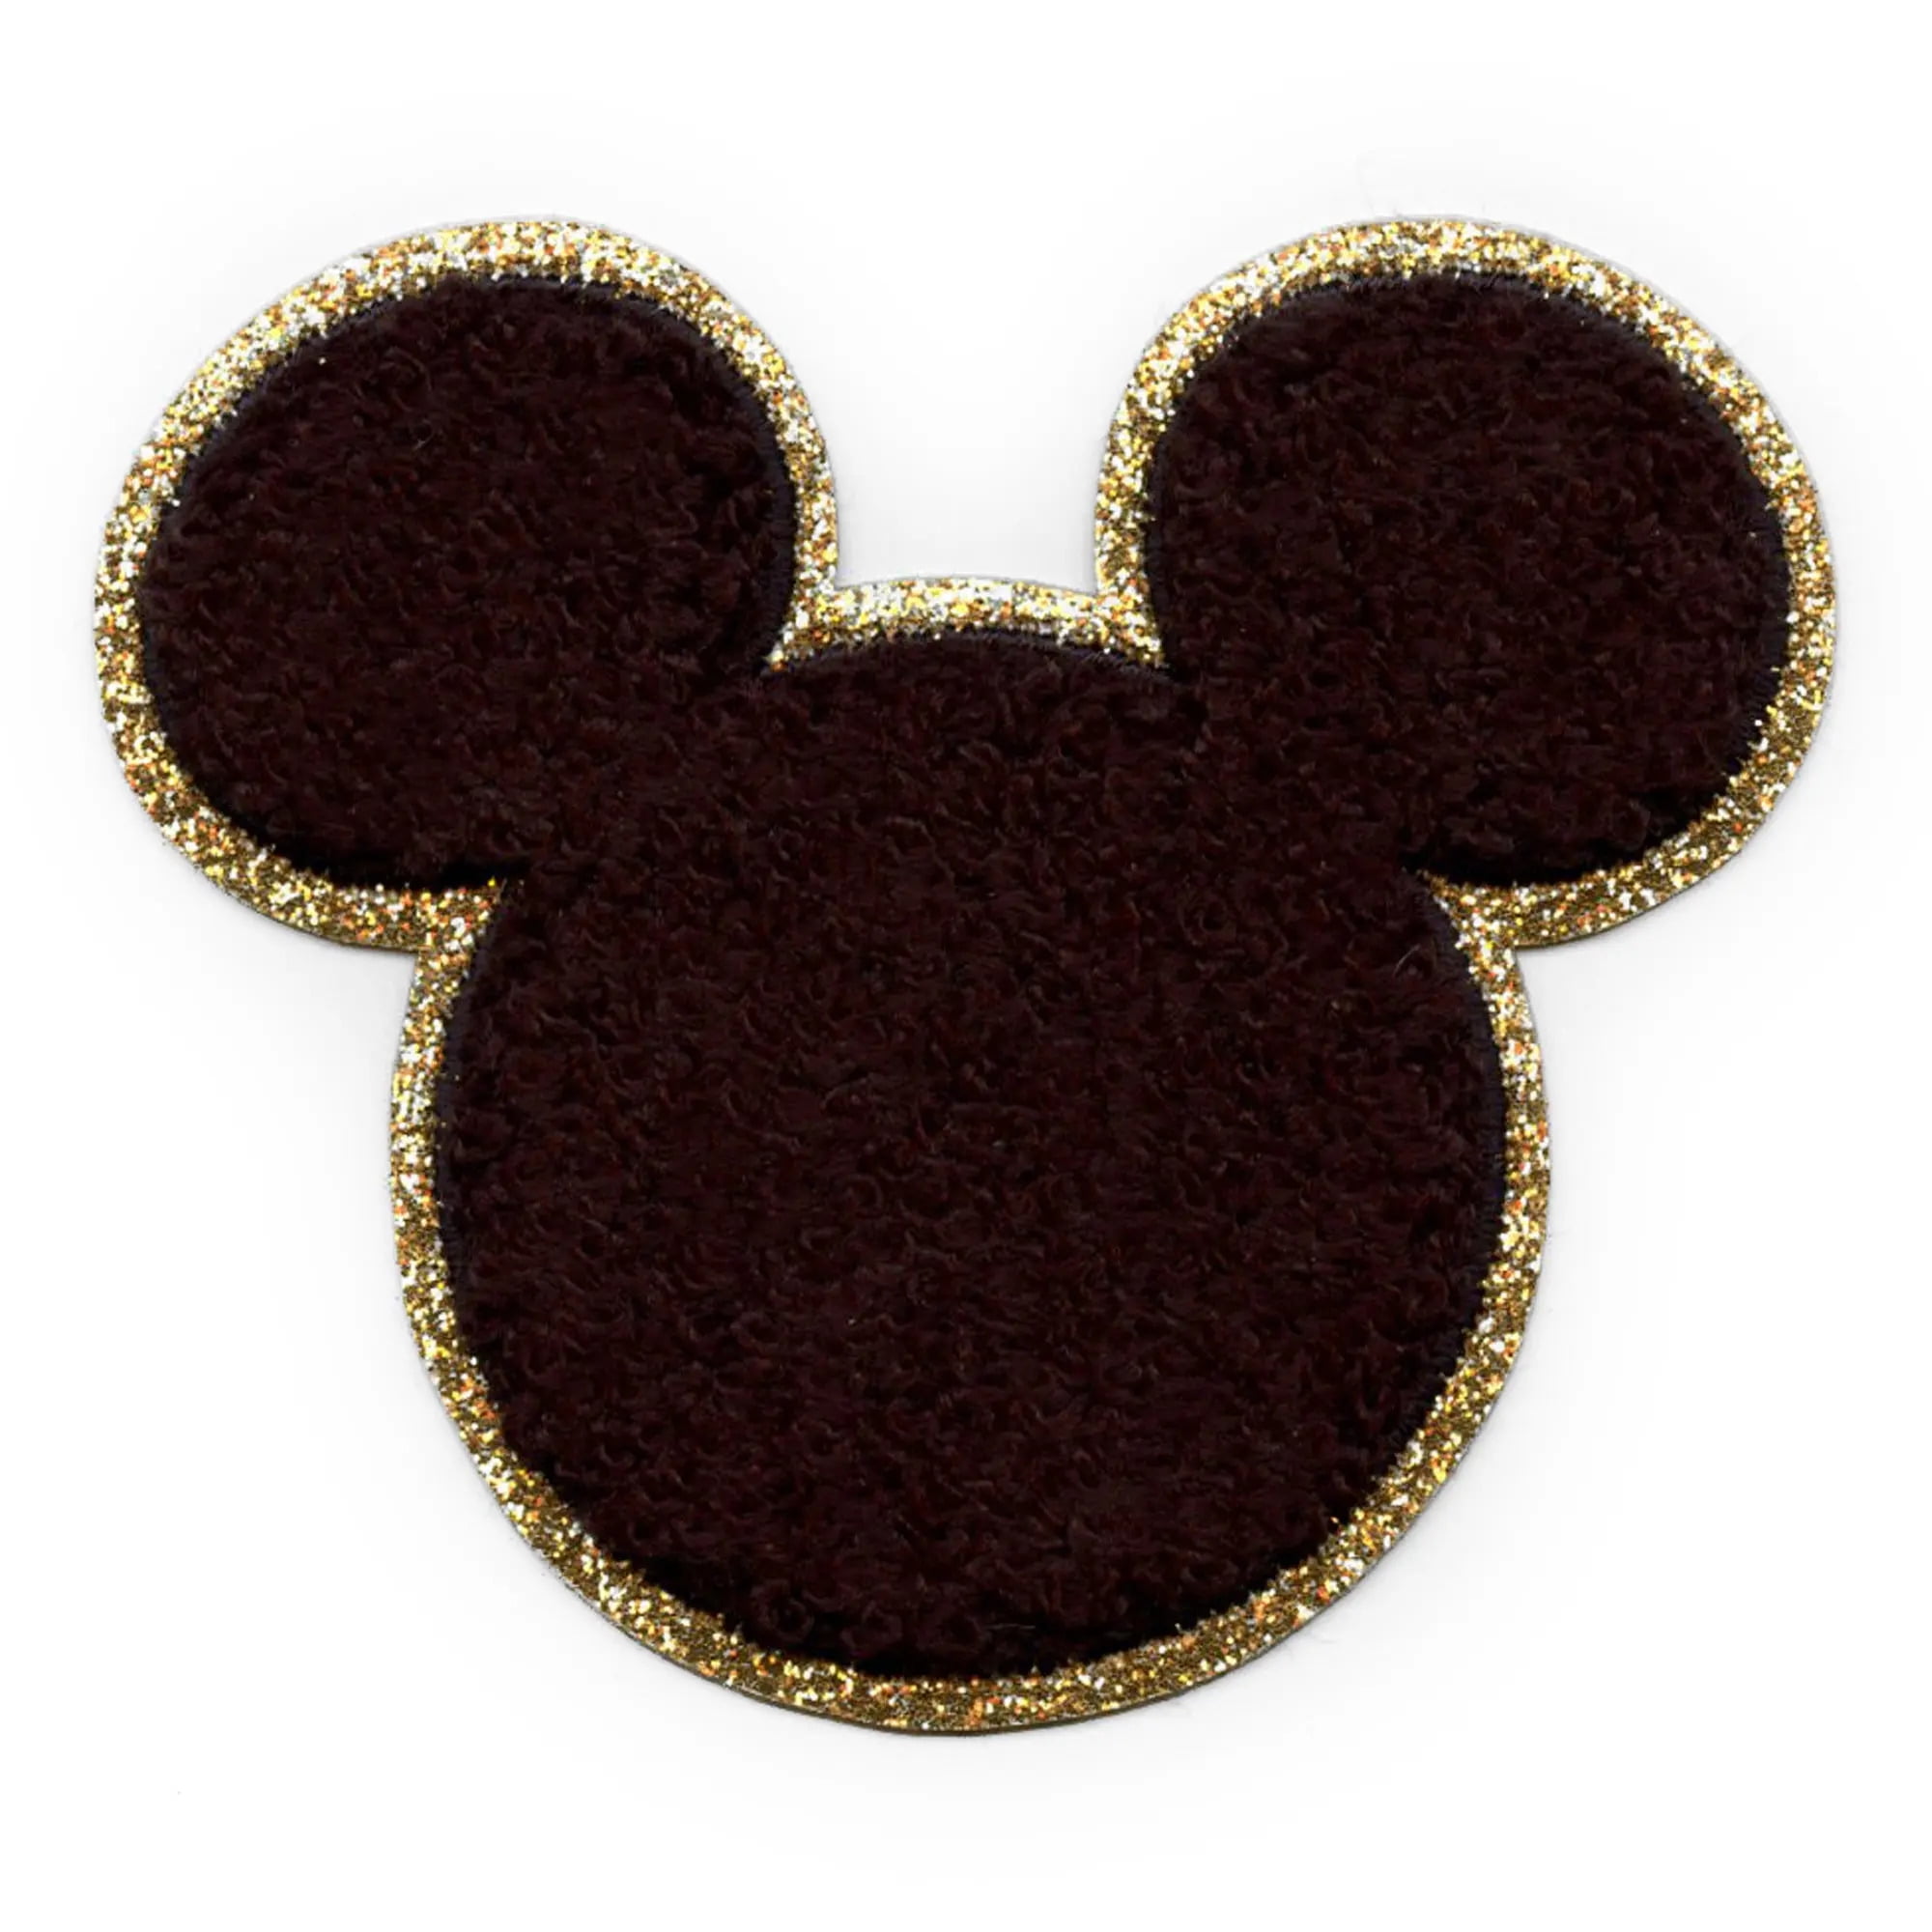 Mickey Mouse Iron on Patch Ready to Ship